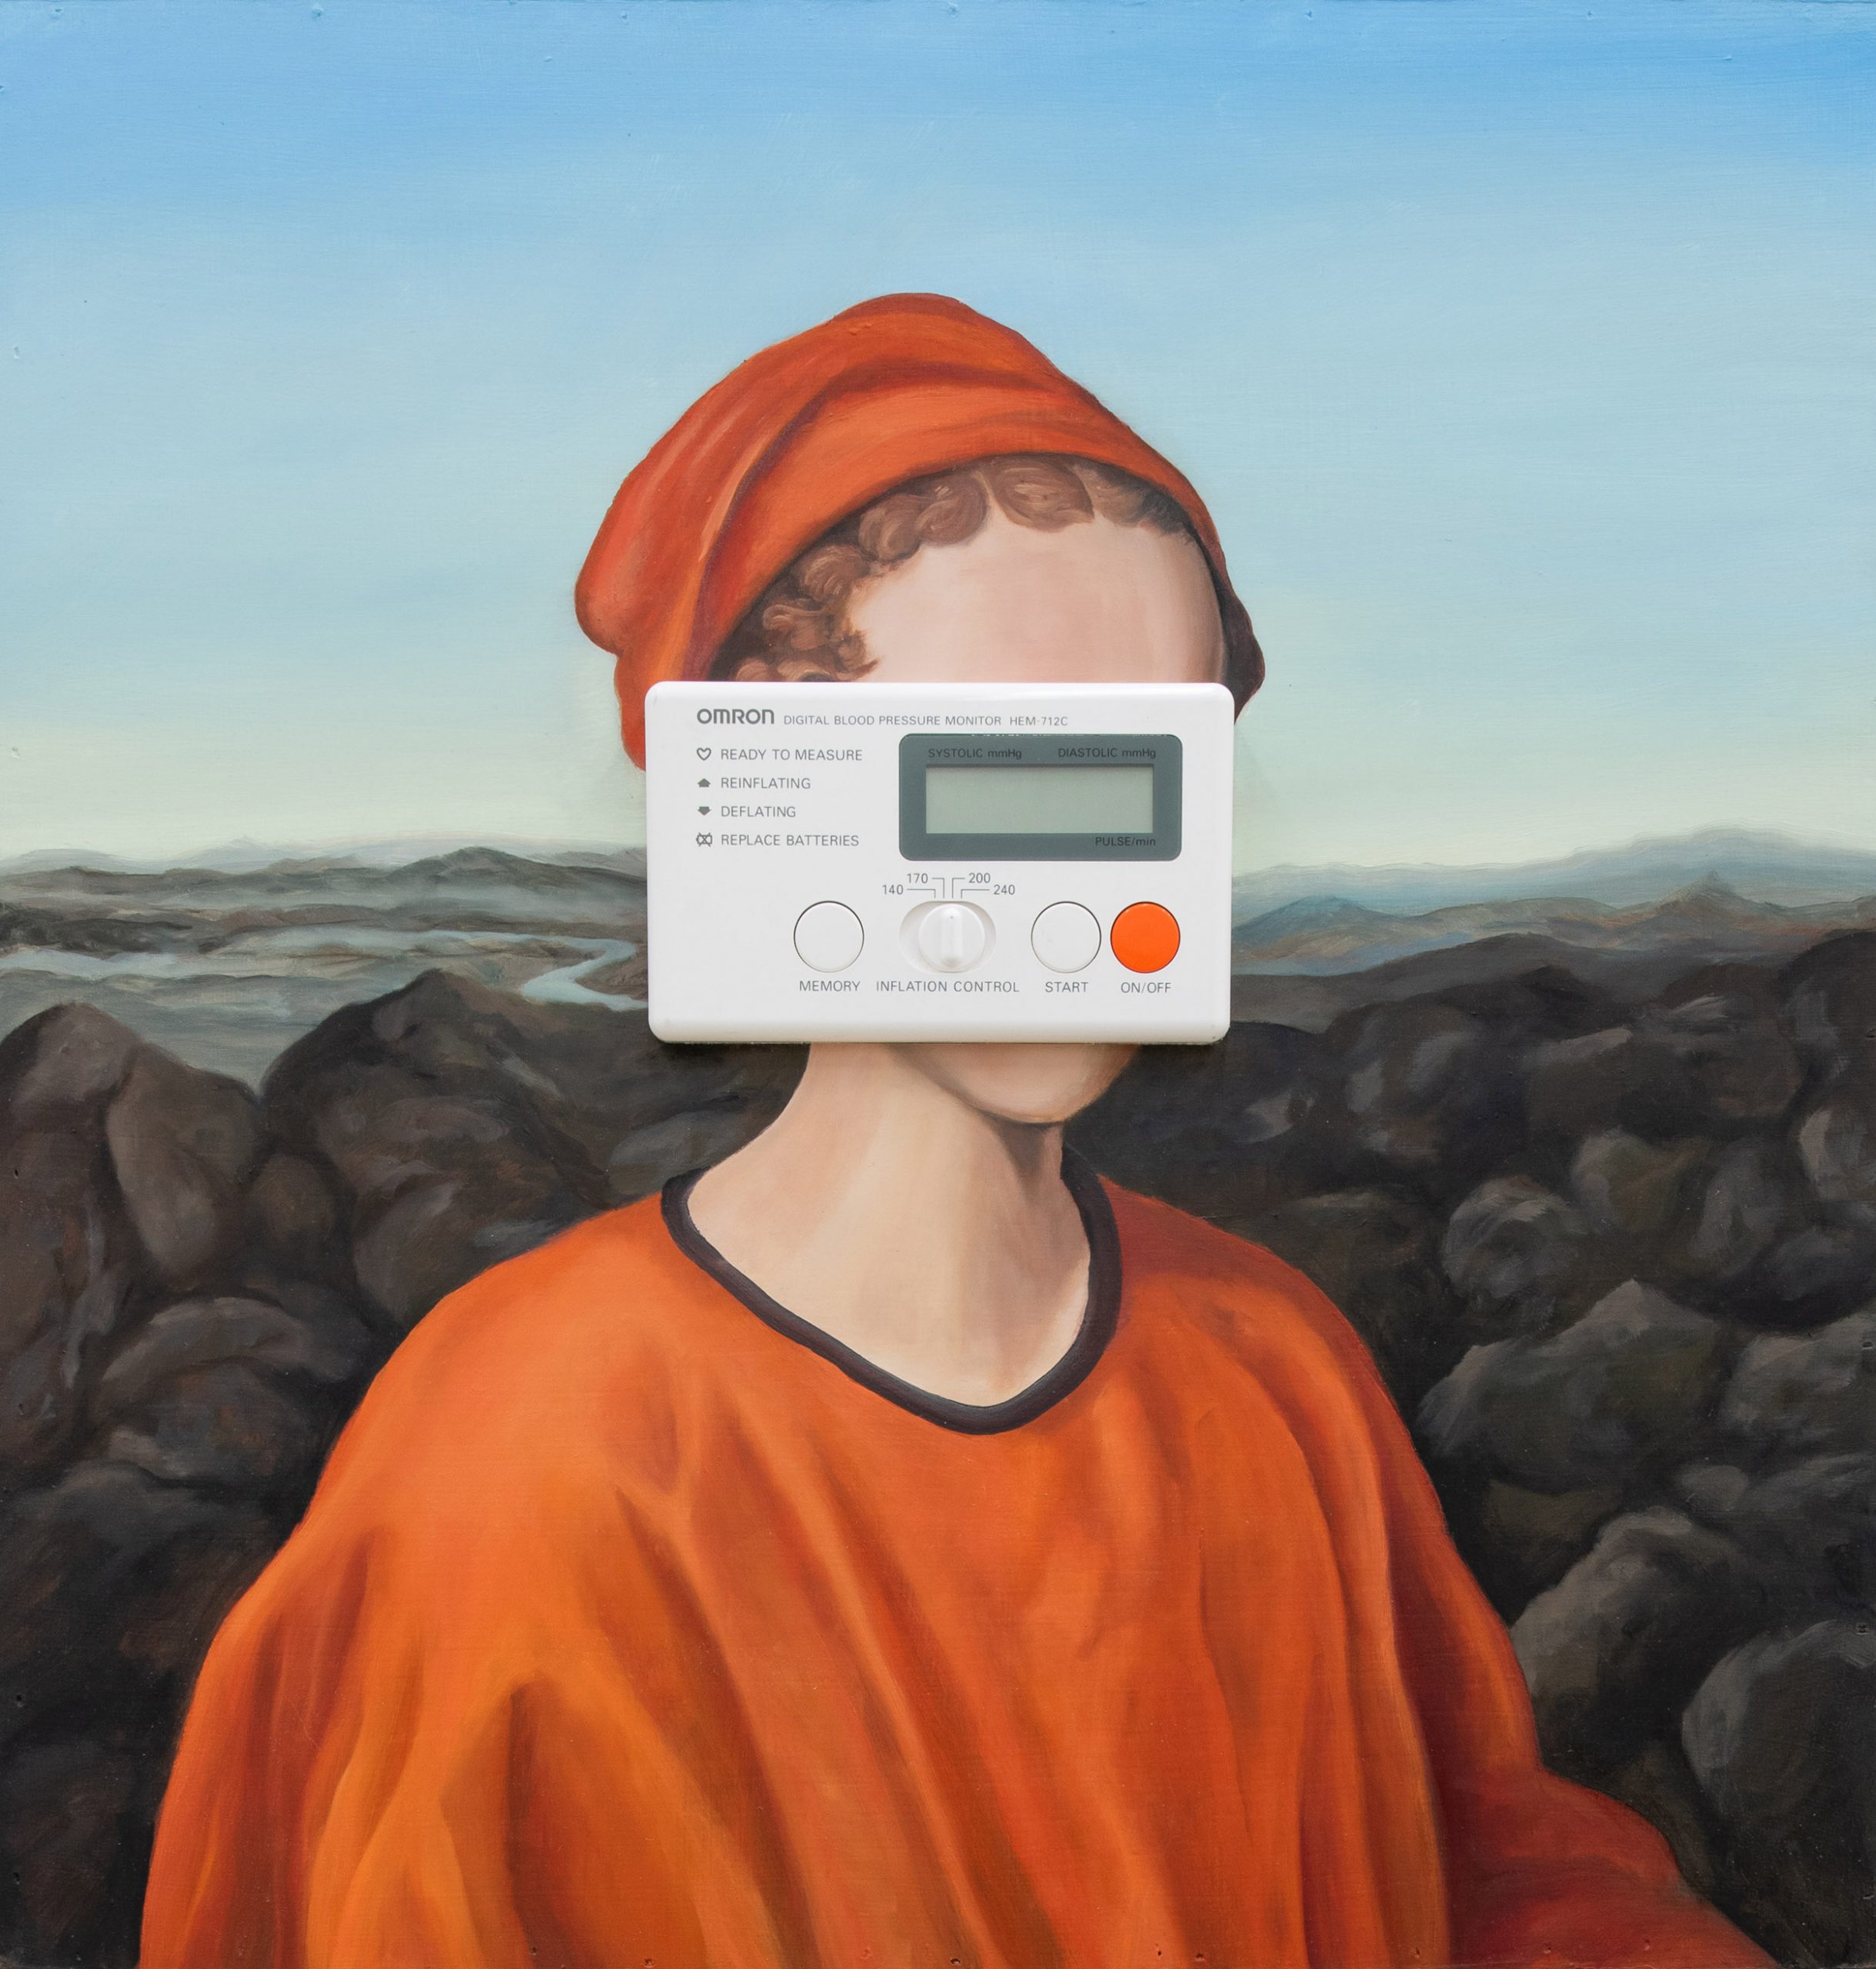 painting of a woman with a blood pressure monitor instead of a face